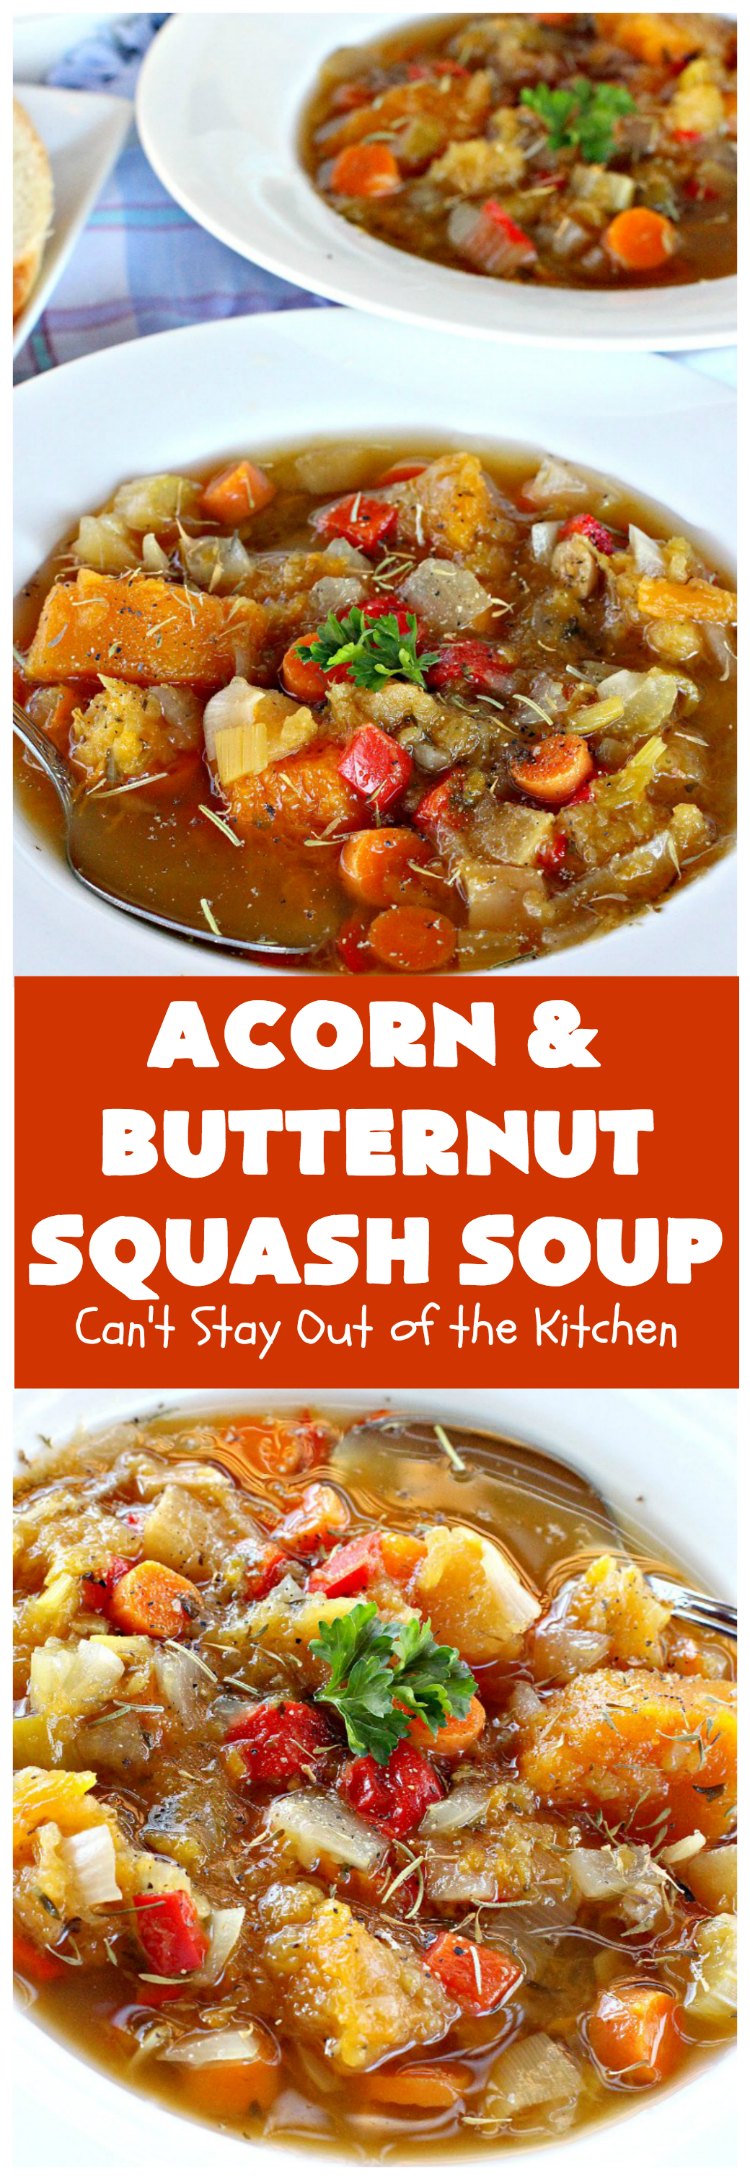 Acorn & Butternut Squash Soup | Can't Stay Out of the Kitchen